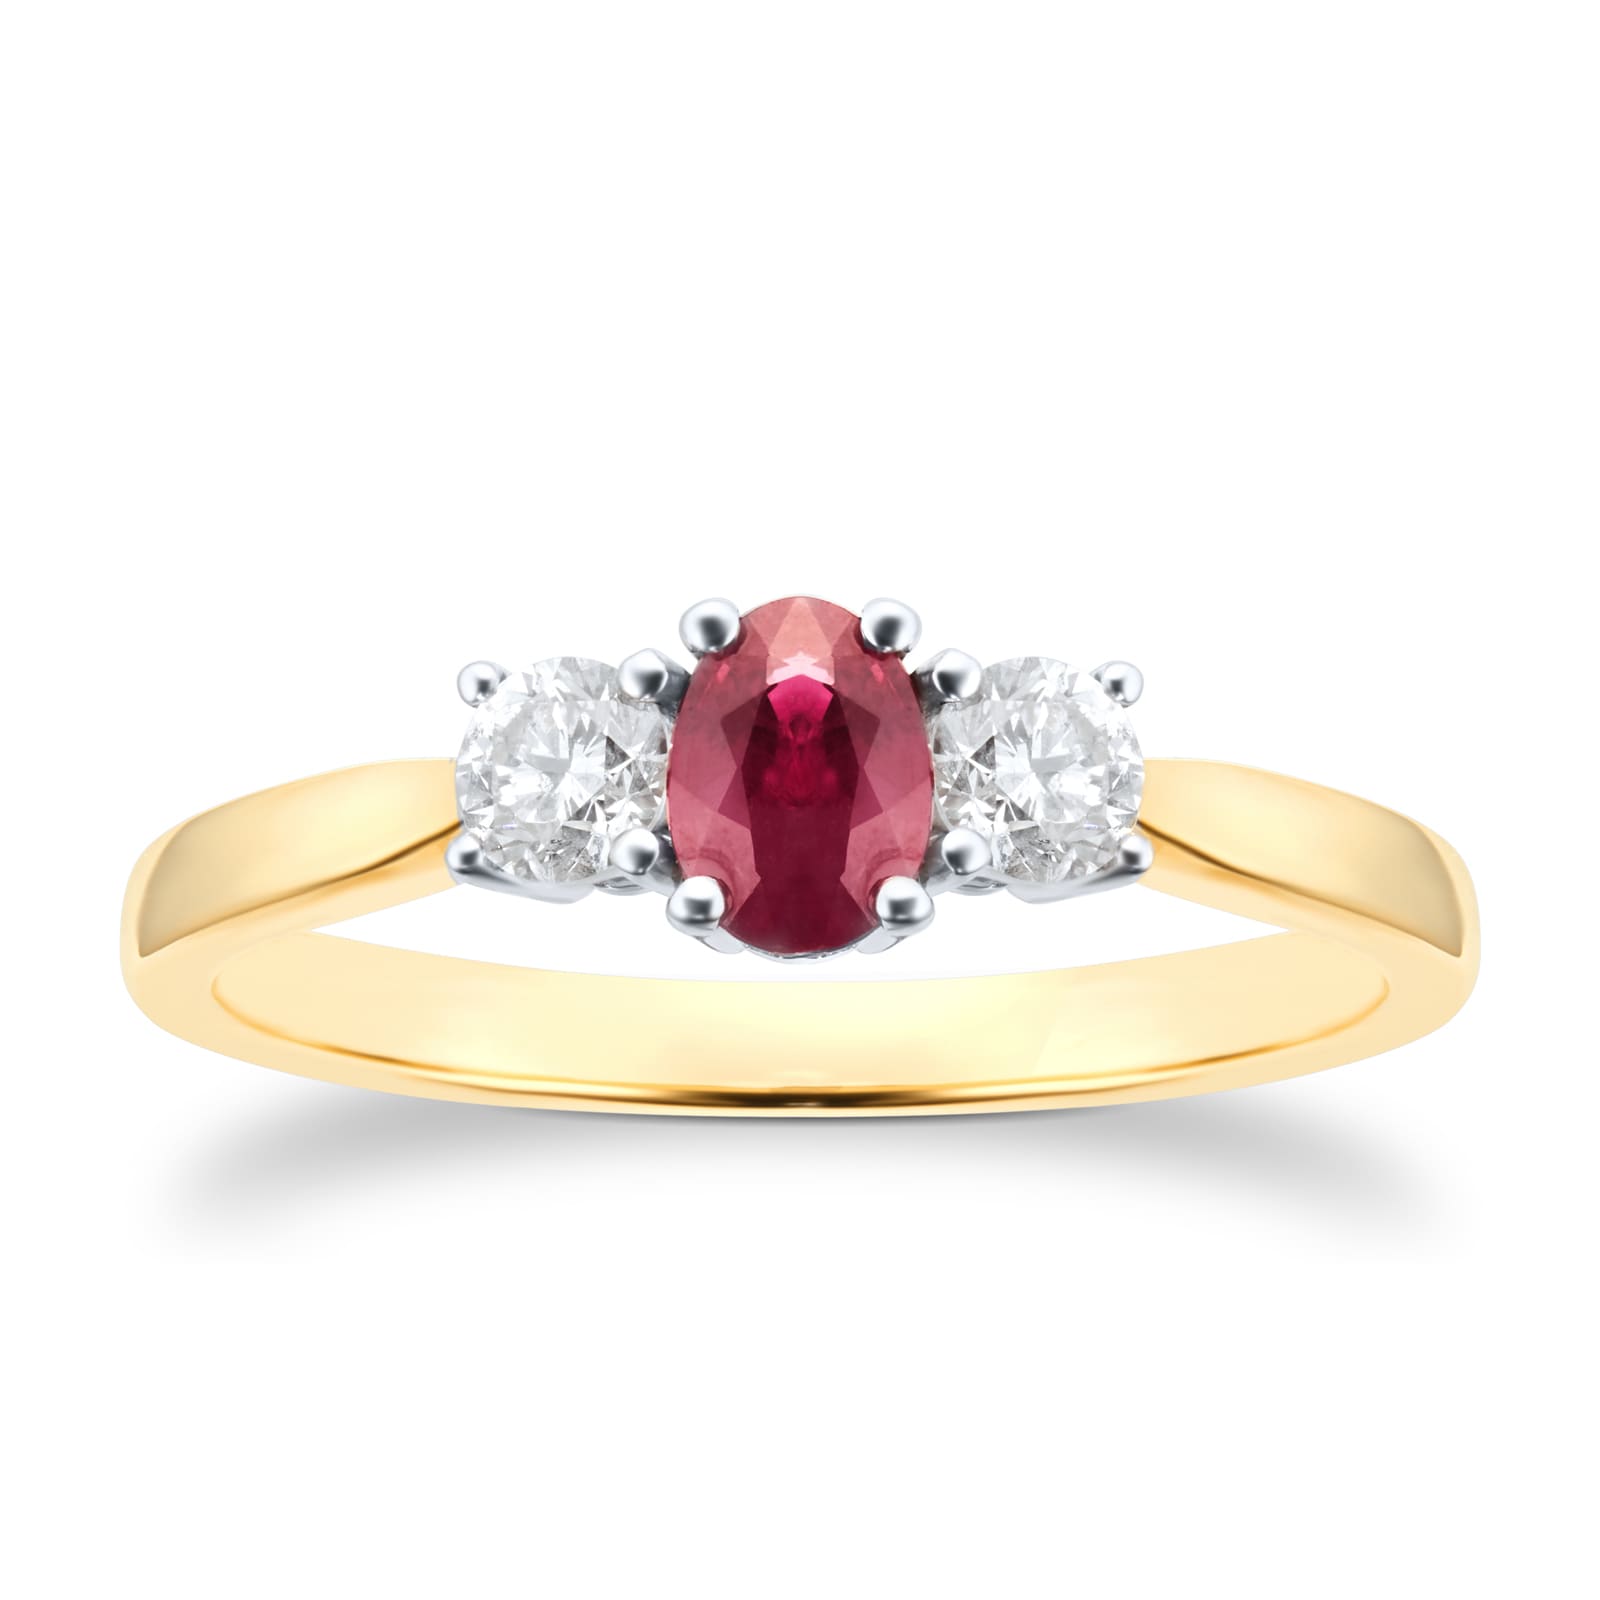 9ct Yellow and White Gold 3 Stone Ruby & Diamond Ring - Ring Size F.5